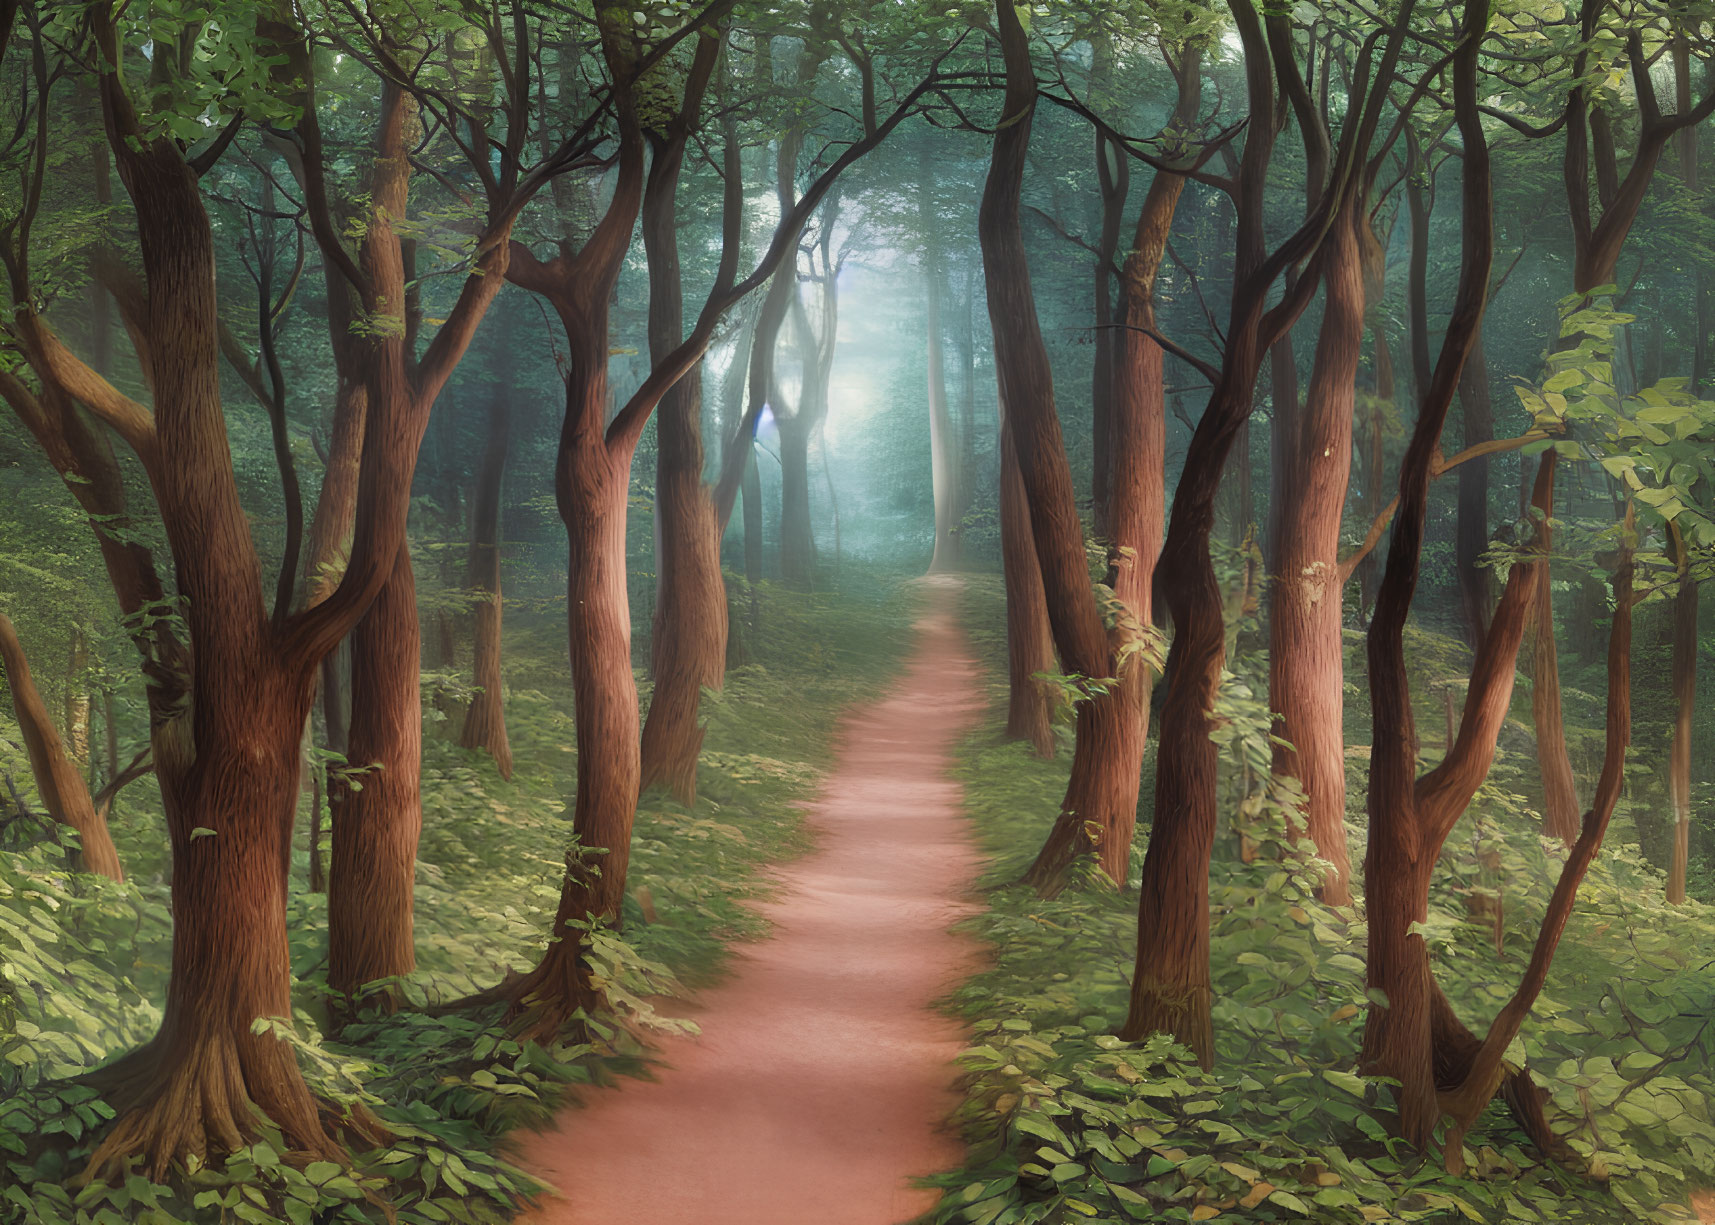 Misty forest path with tall trees and glowing foliage